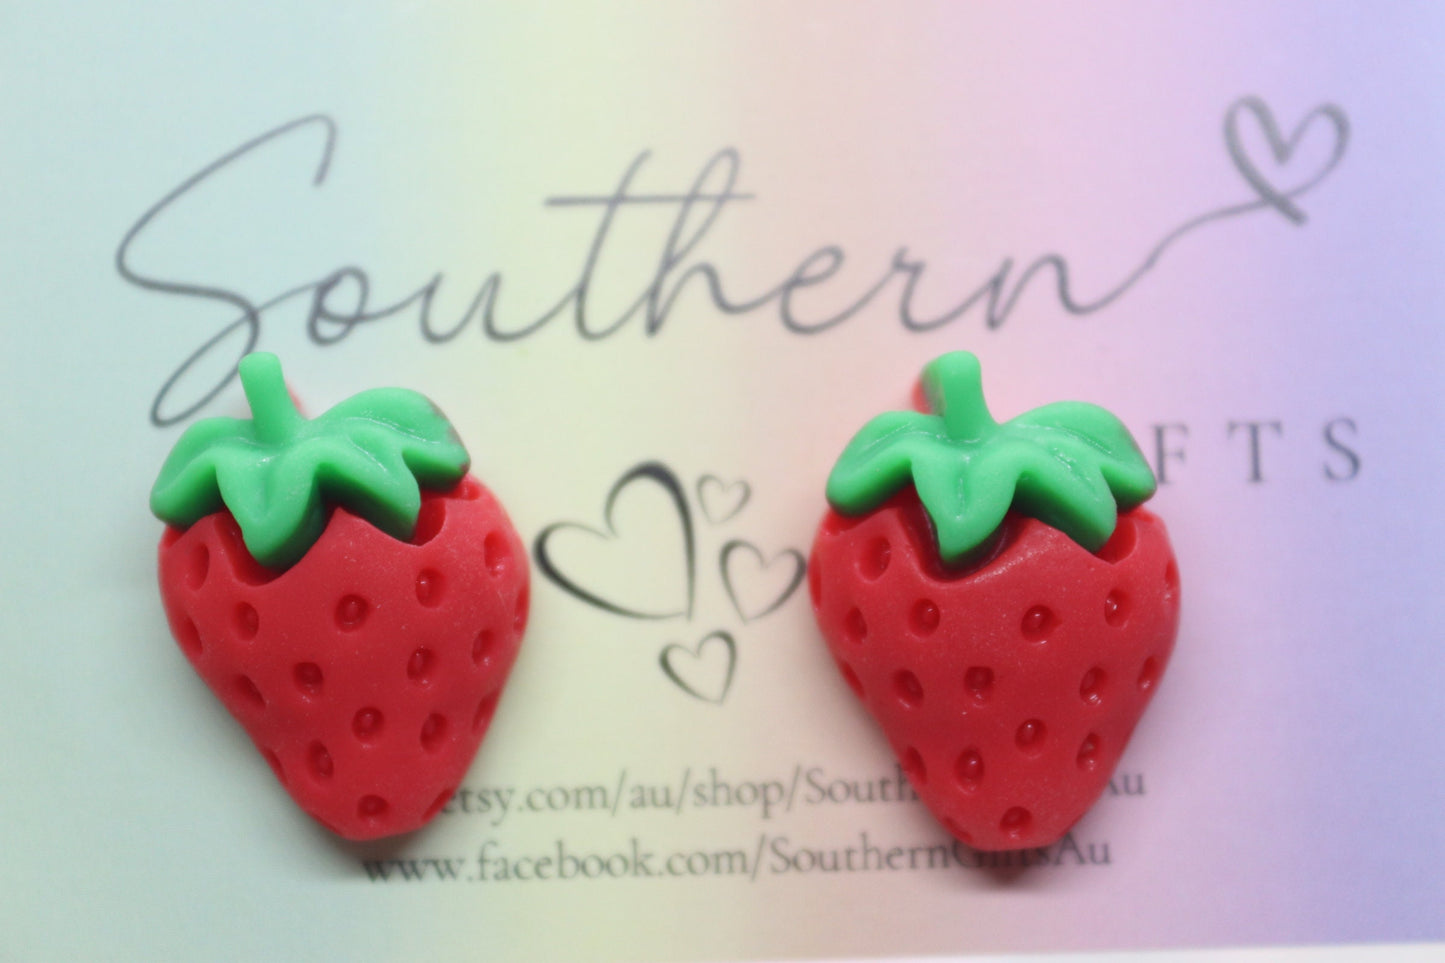 Large Strawberry Statement Stud Earrings